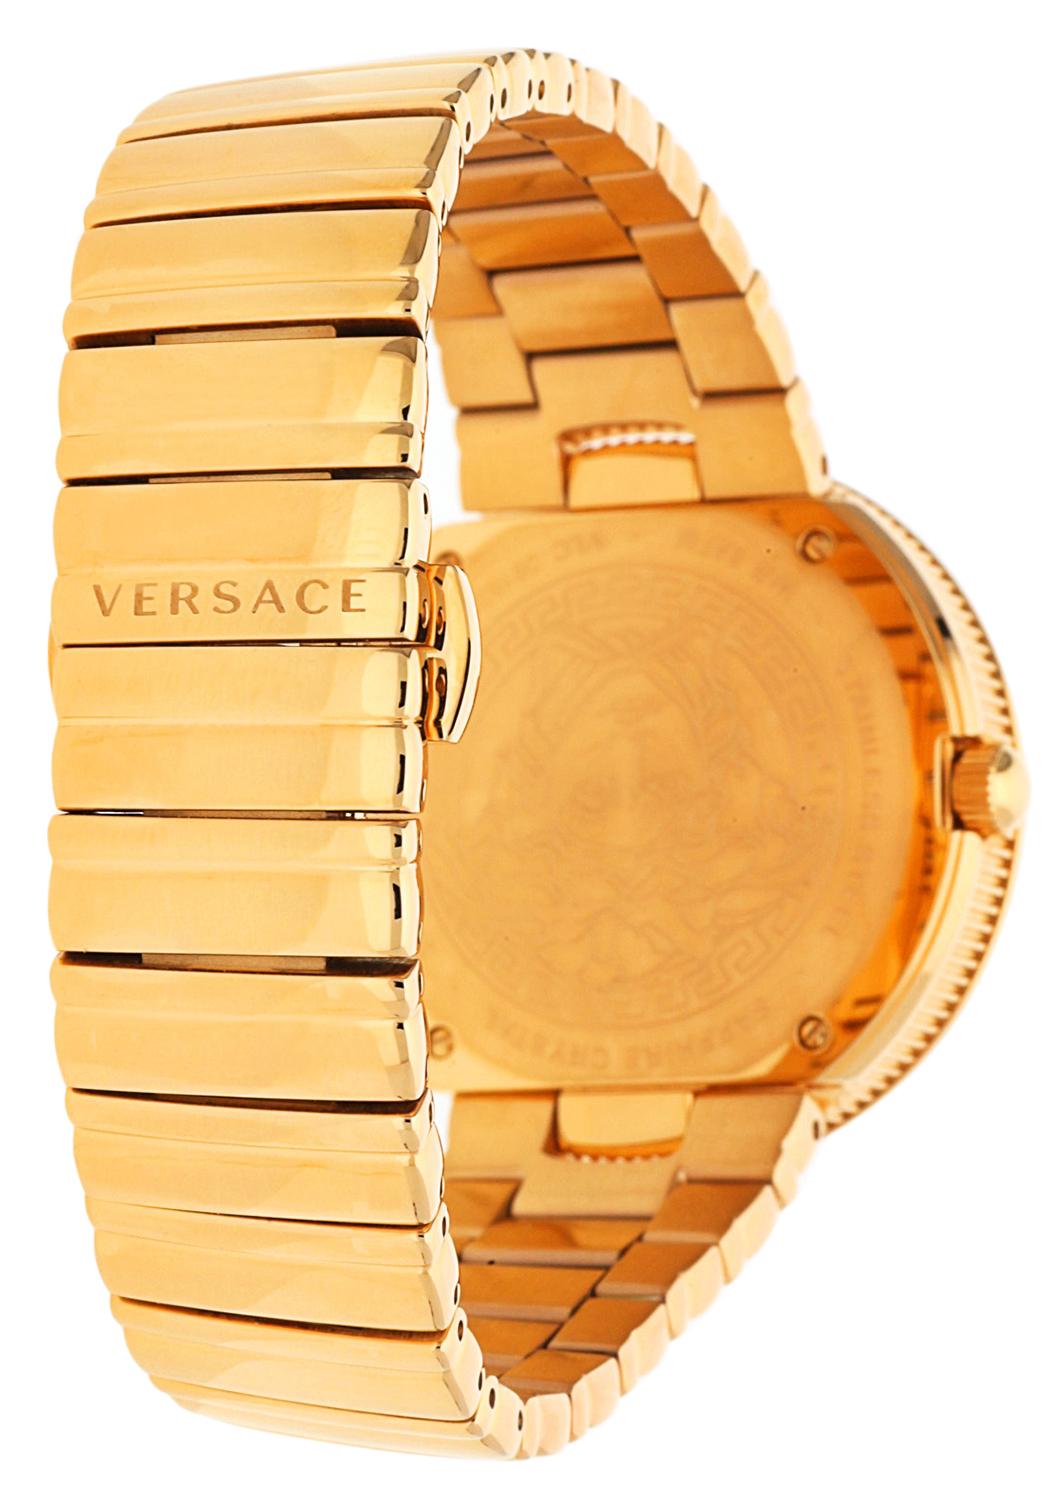 Versace Women Watch V-METAL ICON pink gold VLC090014 In New Condition For Sale In Karlsfeld, DE